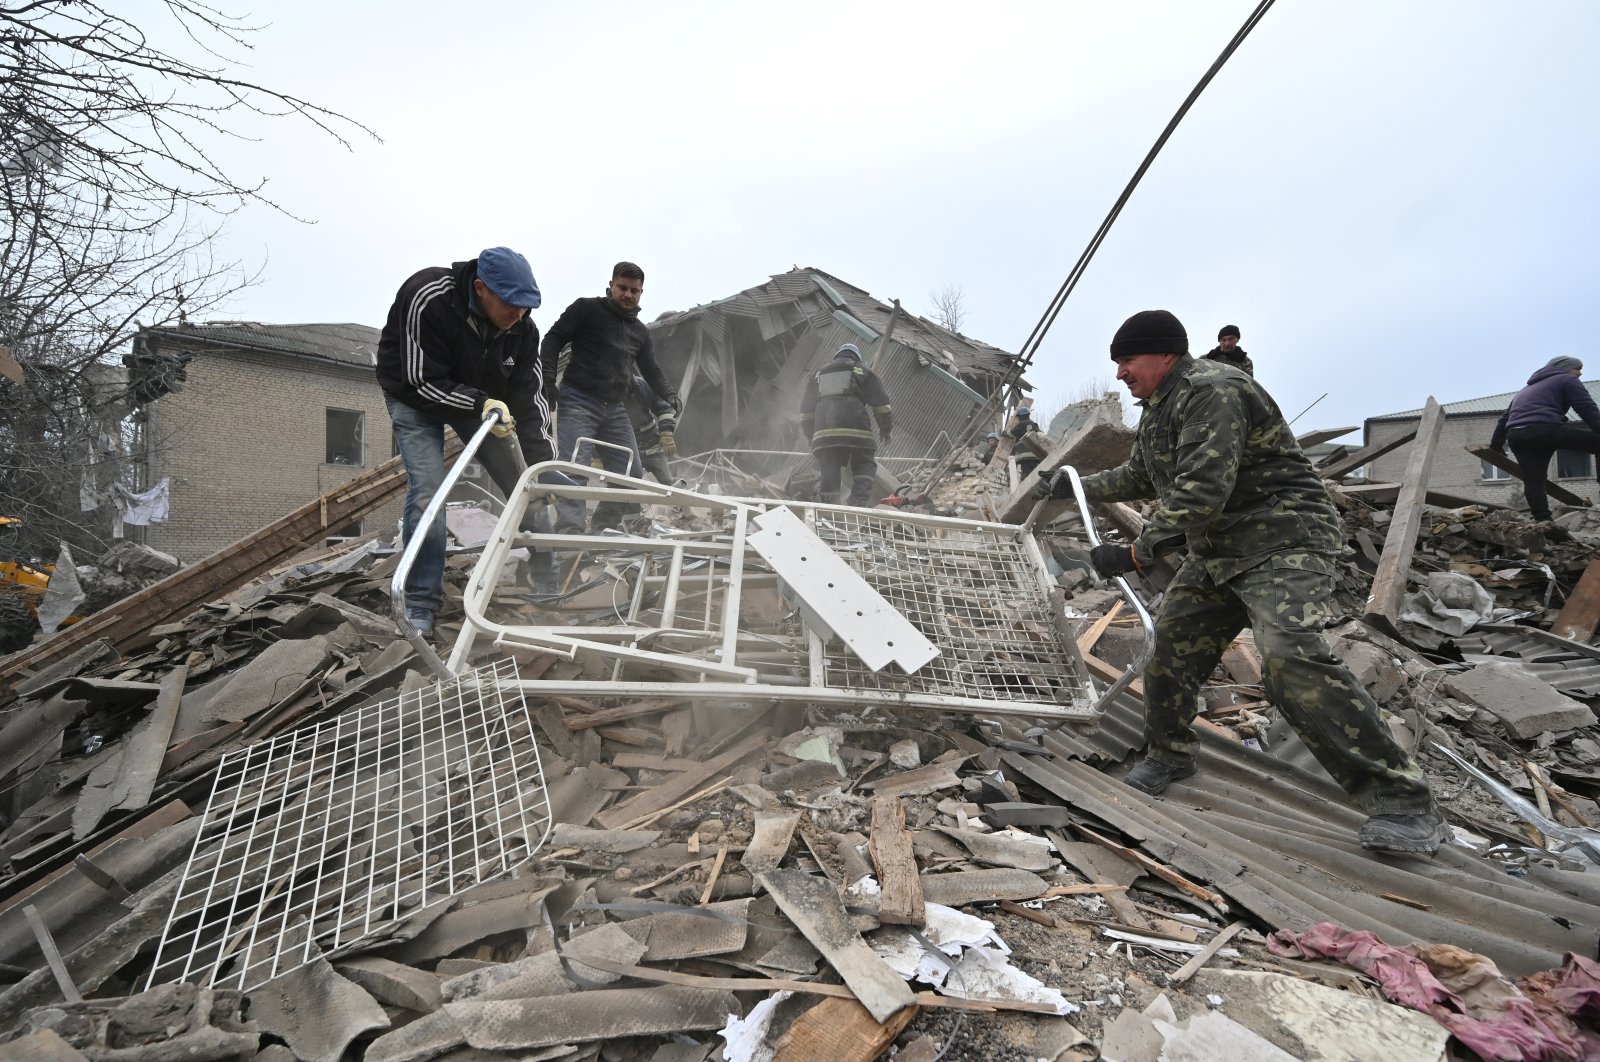 Rescuers work at the site of a maternity ward of a hospital destroyed by a Russian missile attack, Vilniansk, Zaporizhzhia region, Ukraine, Nov. 23, 2022. (Reuters Photo)